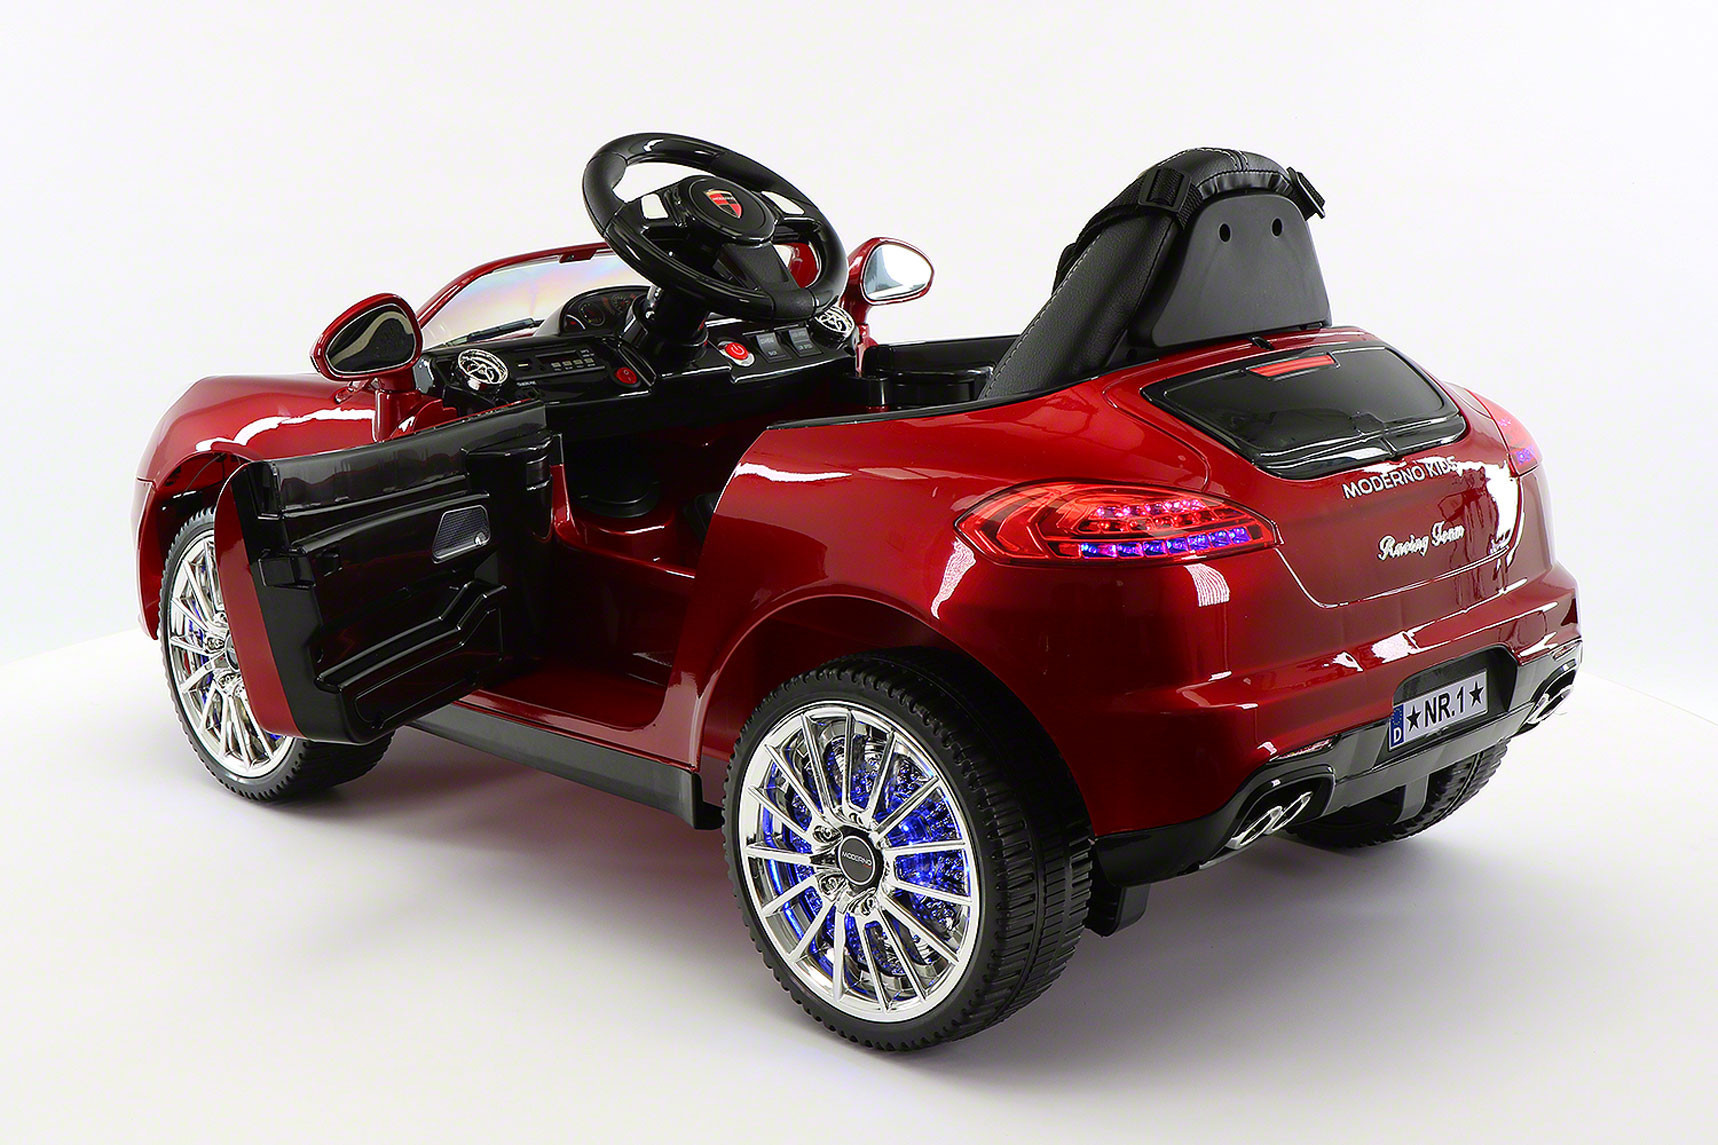 Kiddie Roadster 12V Kids Electric Ride-On Car with R/C Parental Remote | Cherry Red - image 3 of 25